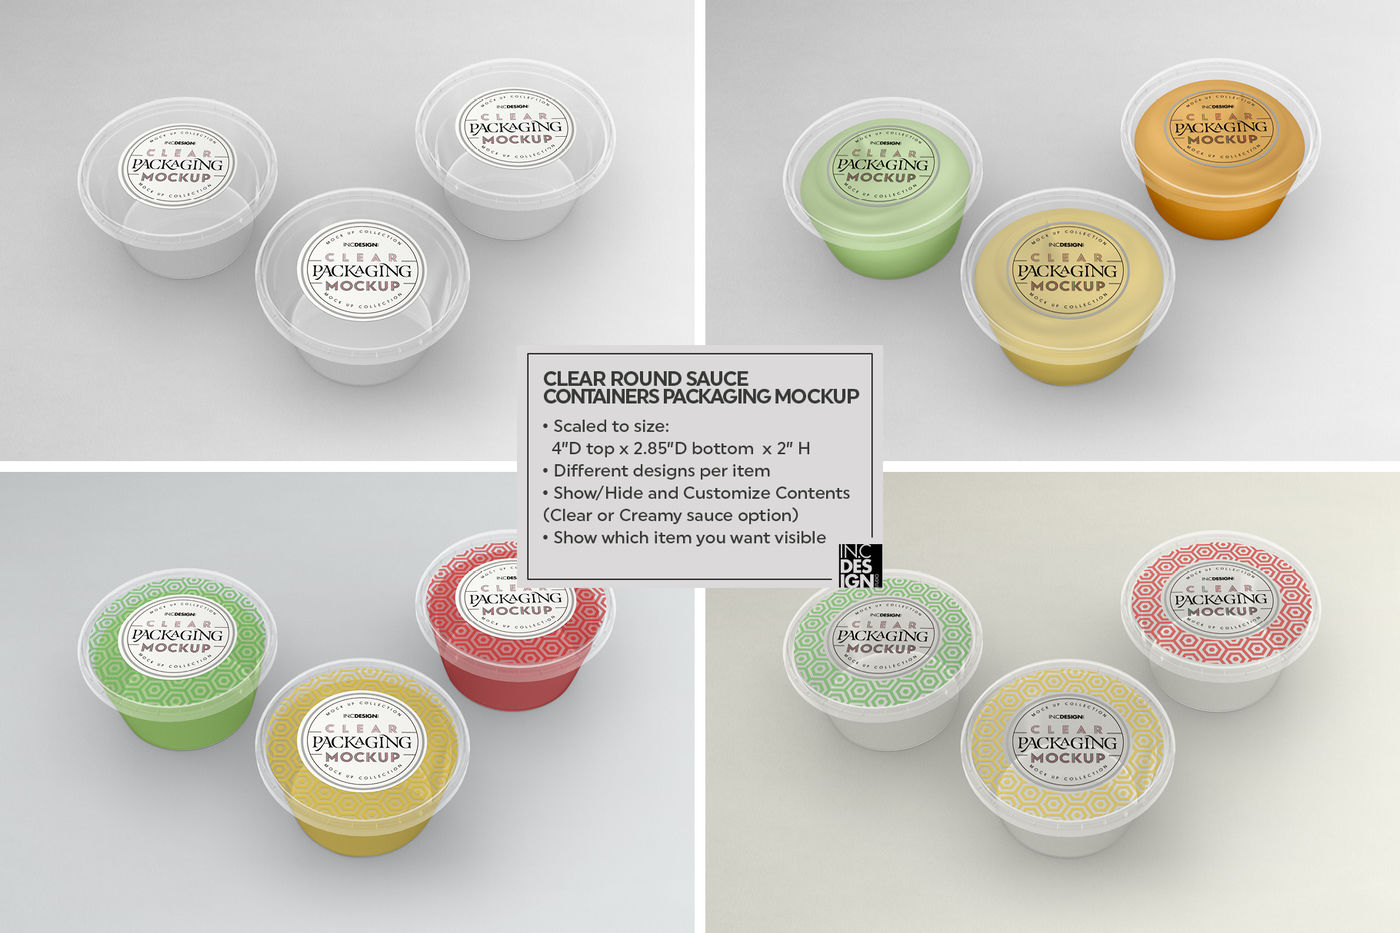 Download Clear Round Sauce Containers Packaging MockUp By INC ...